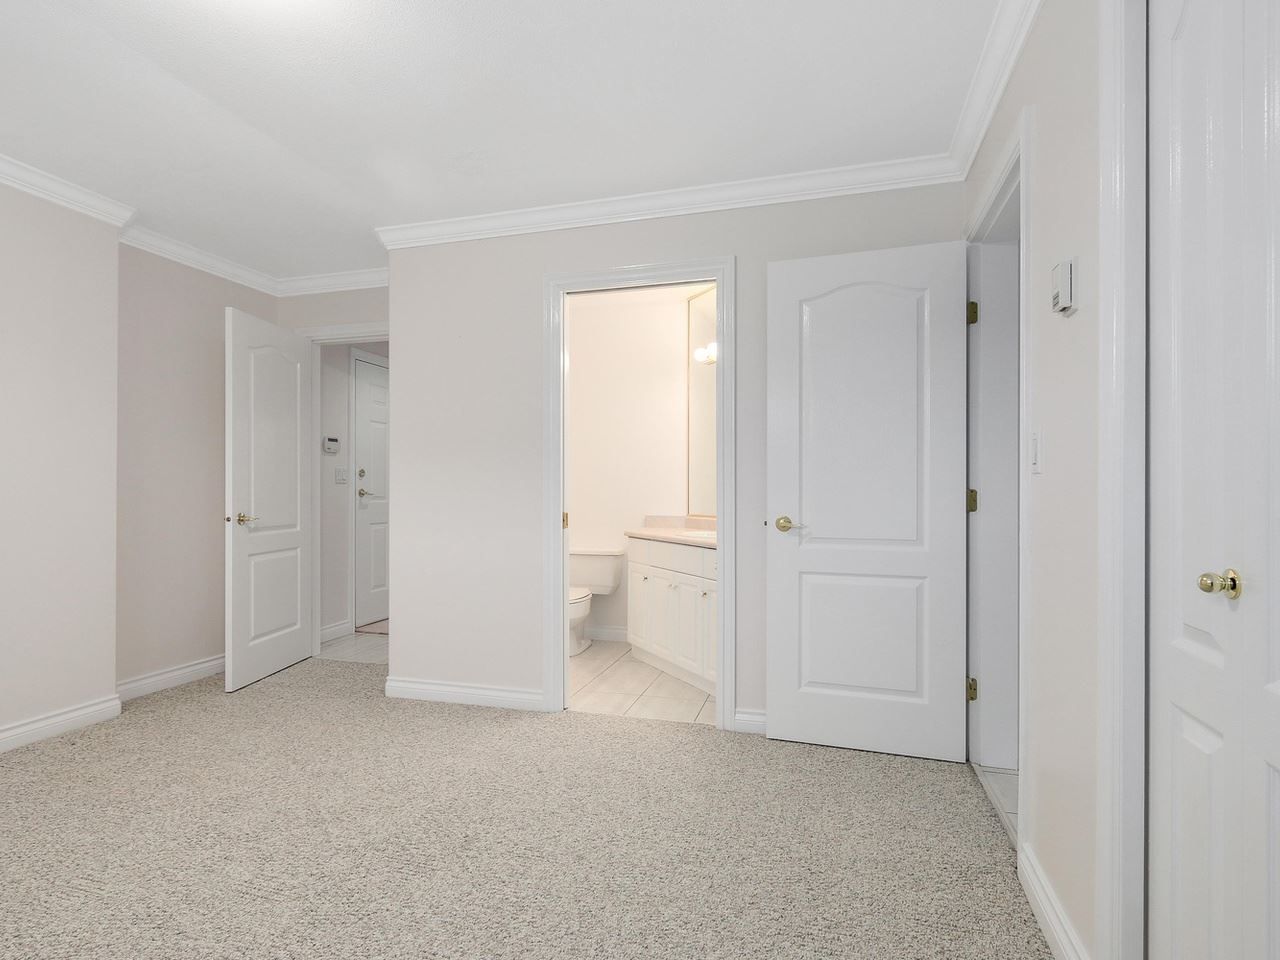 Photo 20: Photos: 1388 BLAINE Drive in Burnaby: Sperling-Duthie House for sale (Burnaby North)  : MLS®# R2146220